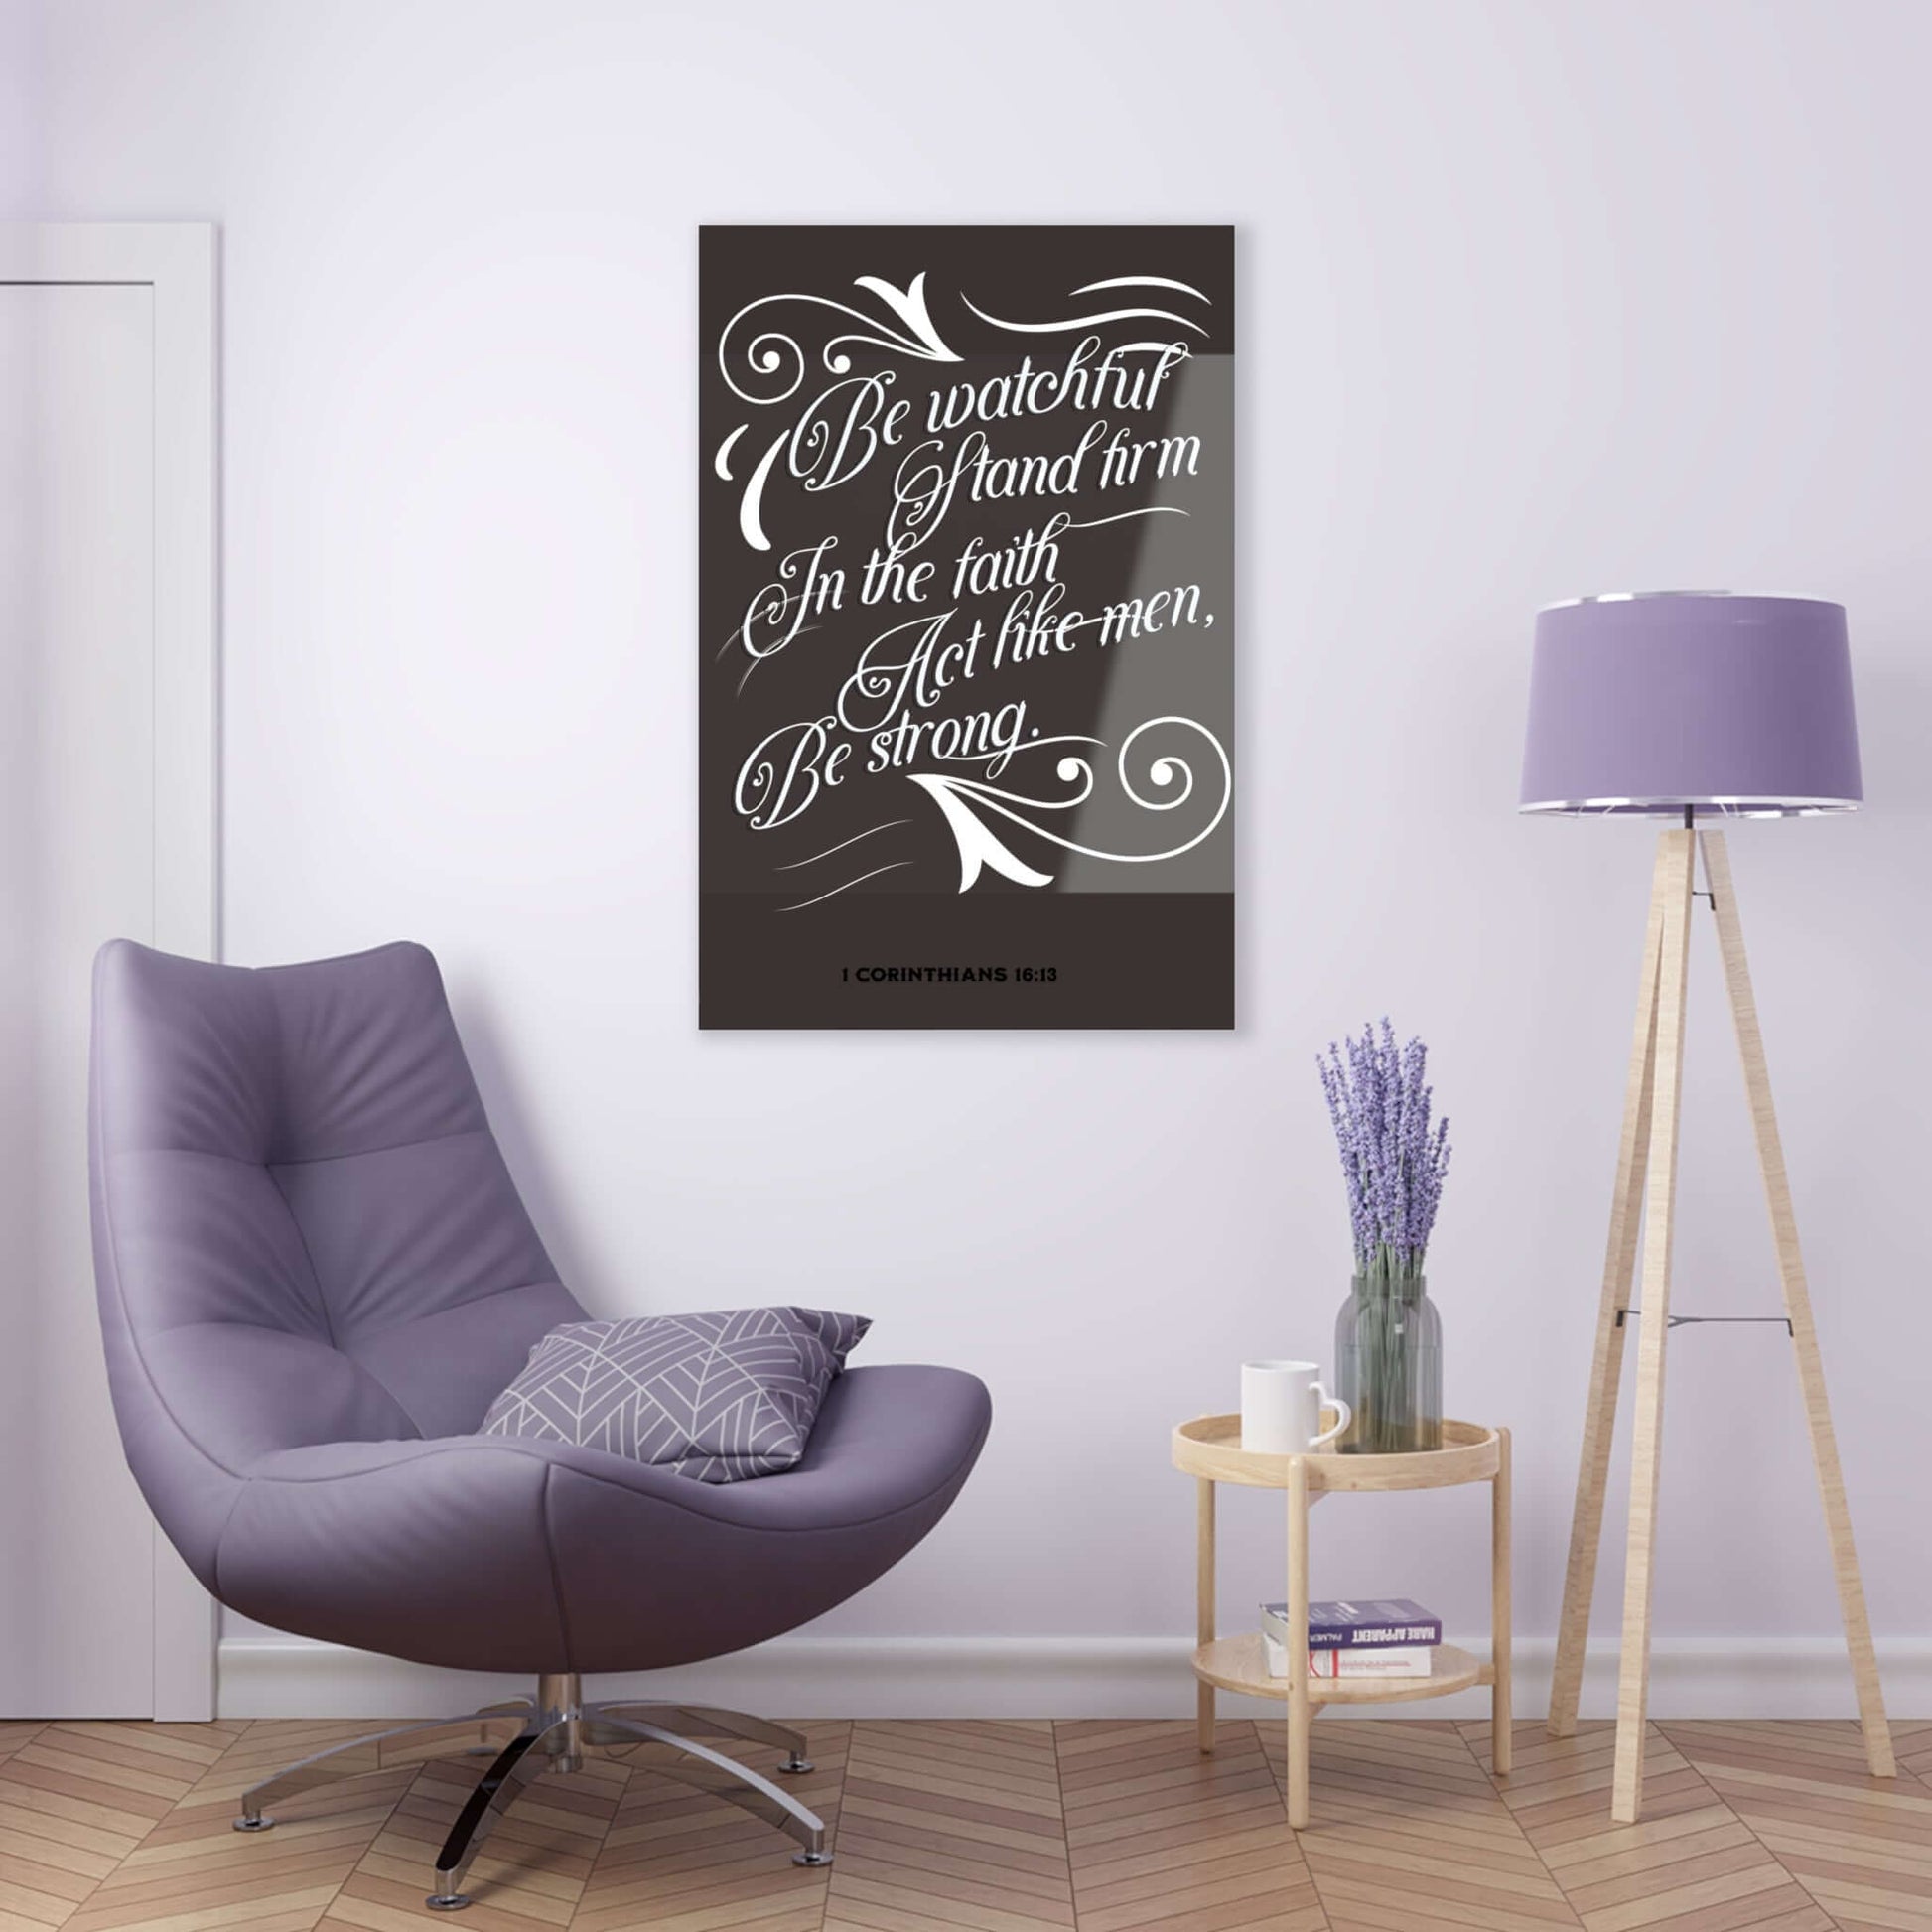 Wall Art for Stairs - Acrylic Print with Inspirational Scripture | Art & Wall Decor,Assembled in the USA,Assembled in USA,Decor,Home & Living,Home Decor,Indoor,Made in the USA,Made in USA,Poster